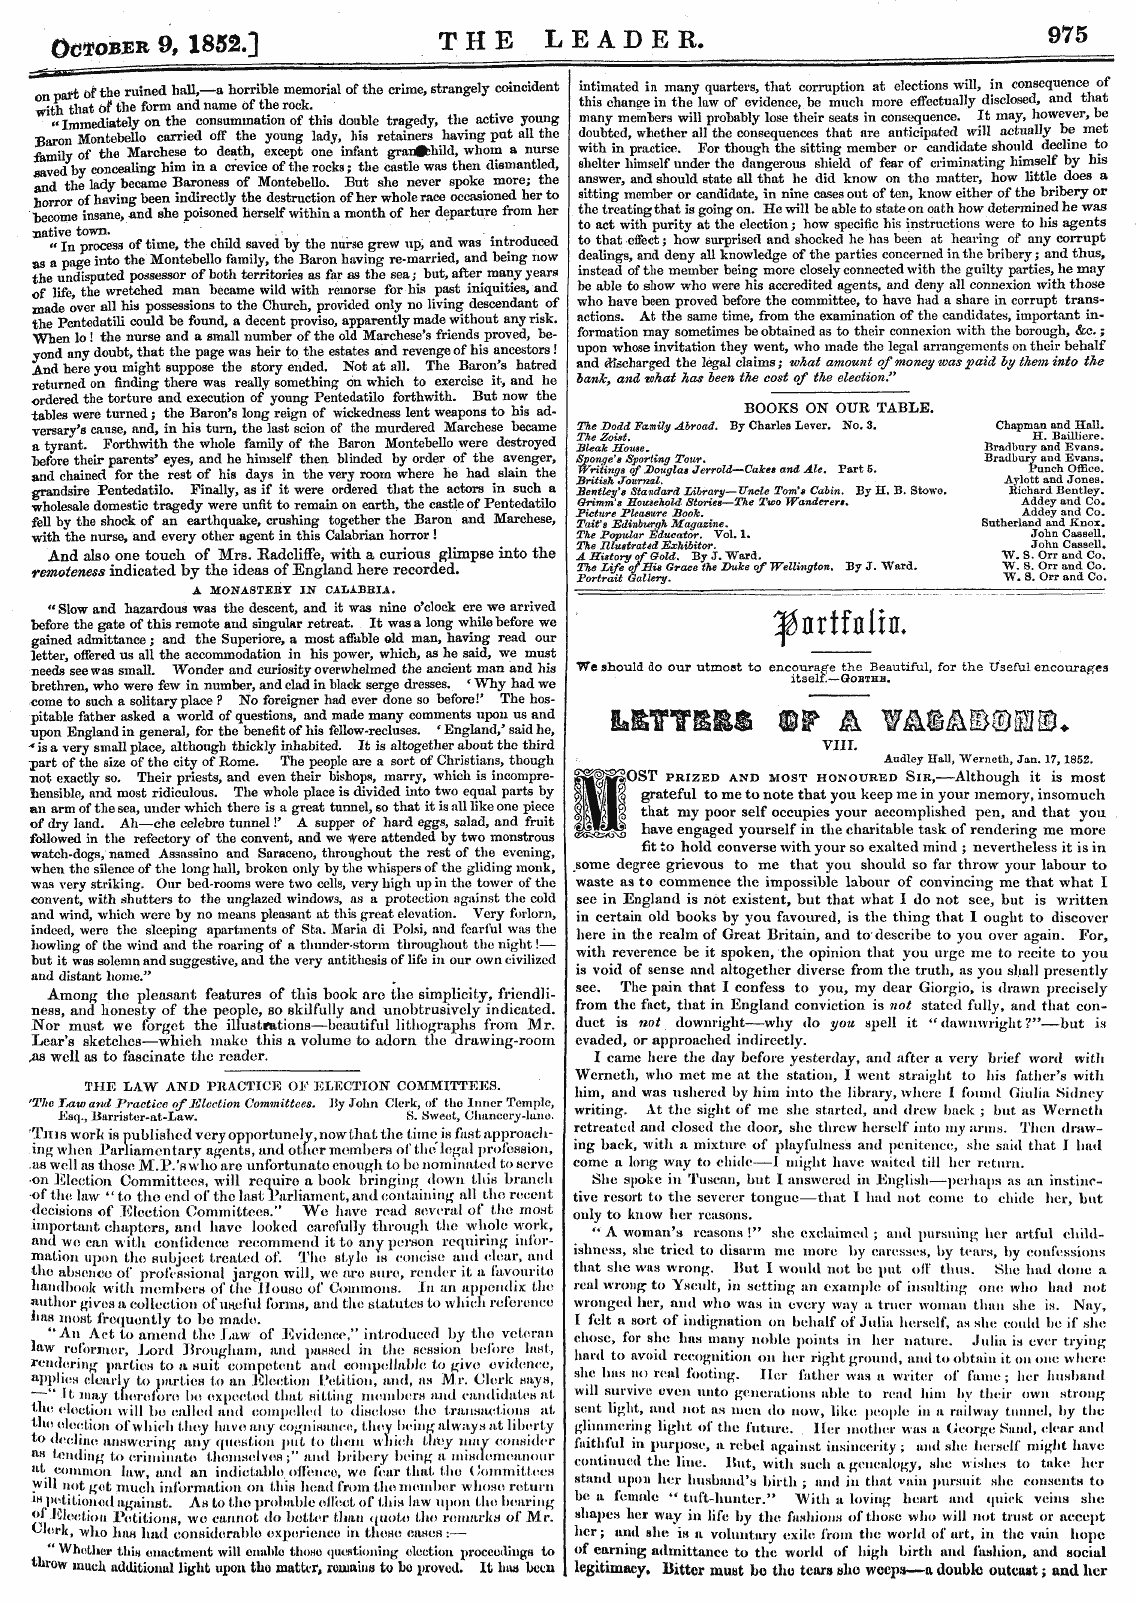 Leader (1850-1860): jS F Y, Country edition - October 9, 1852.] The Leader. 975